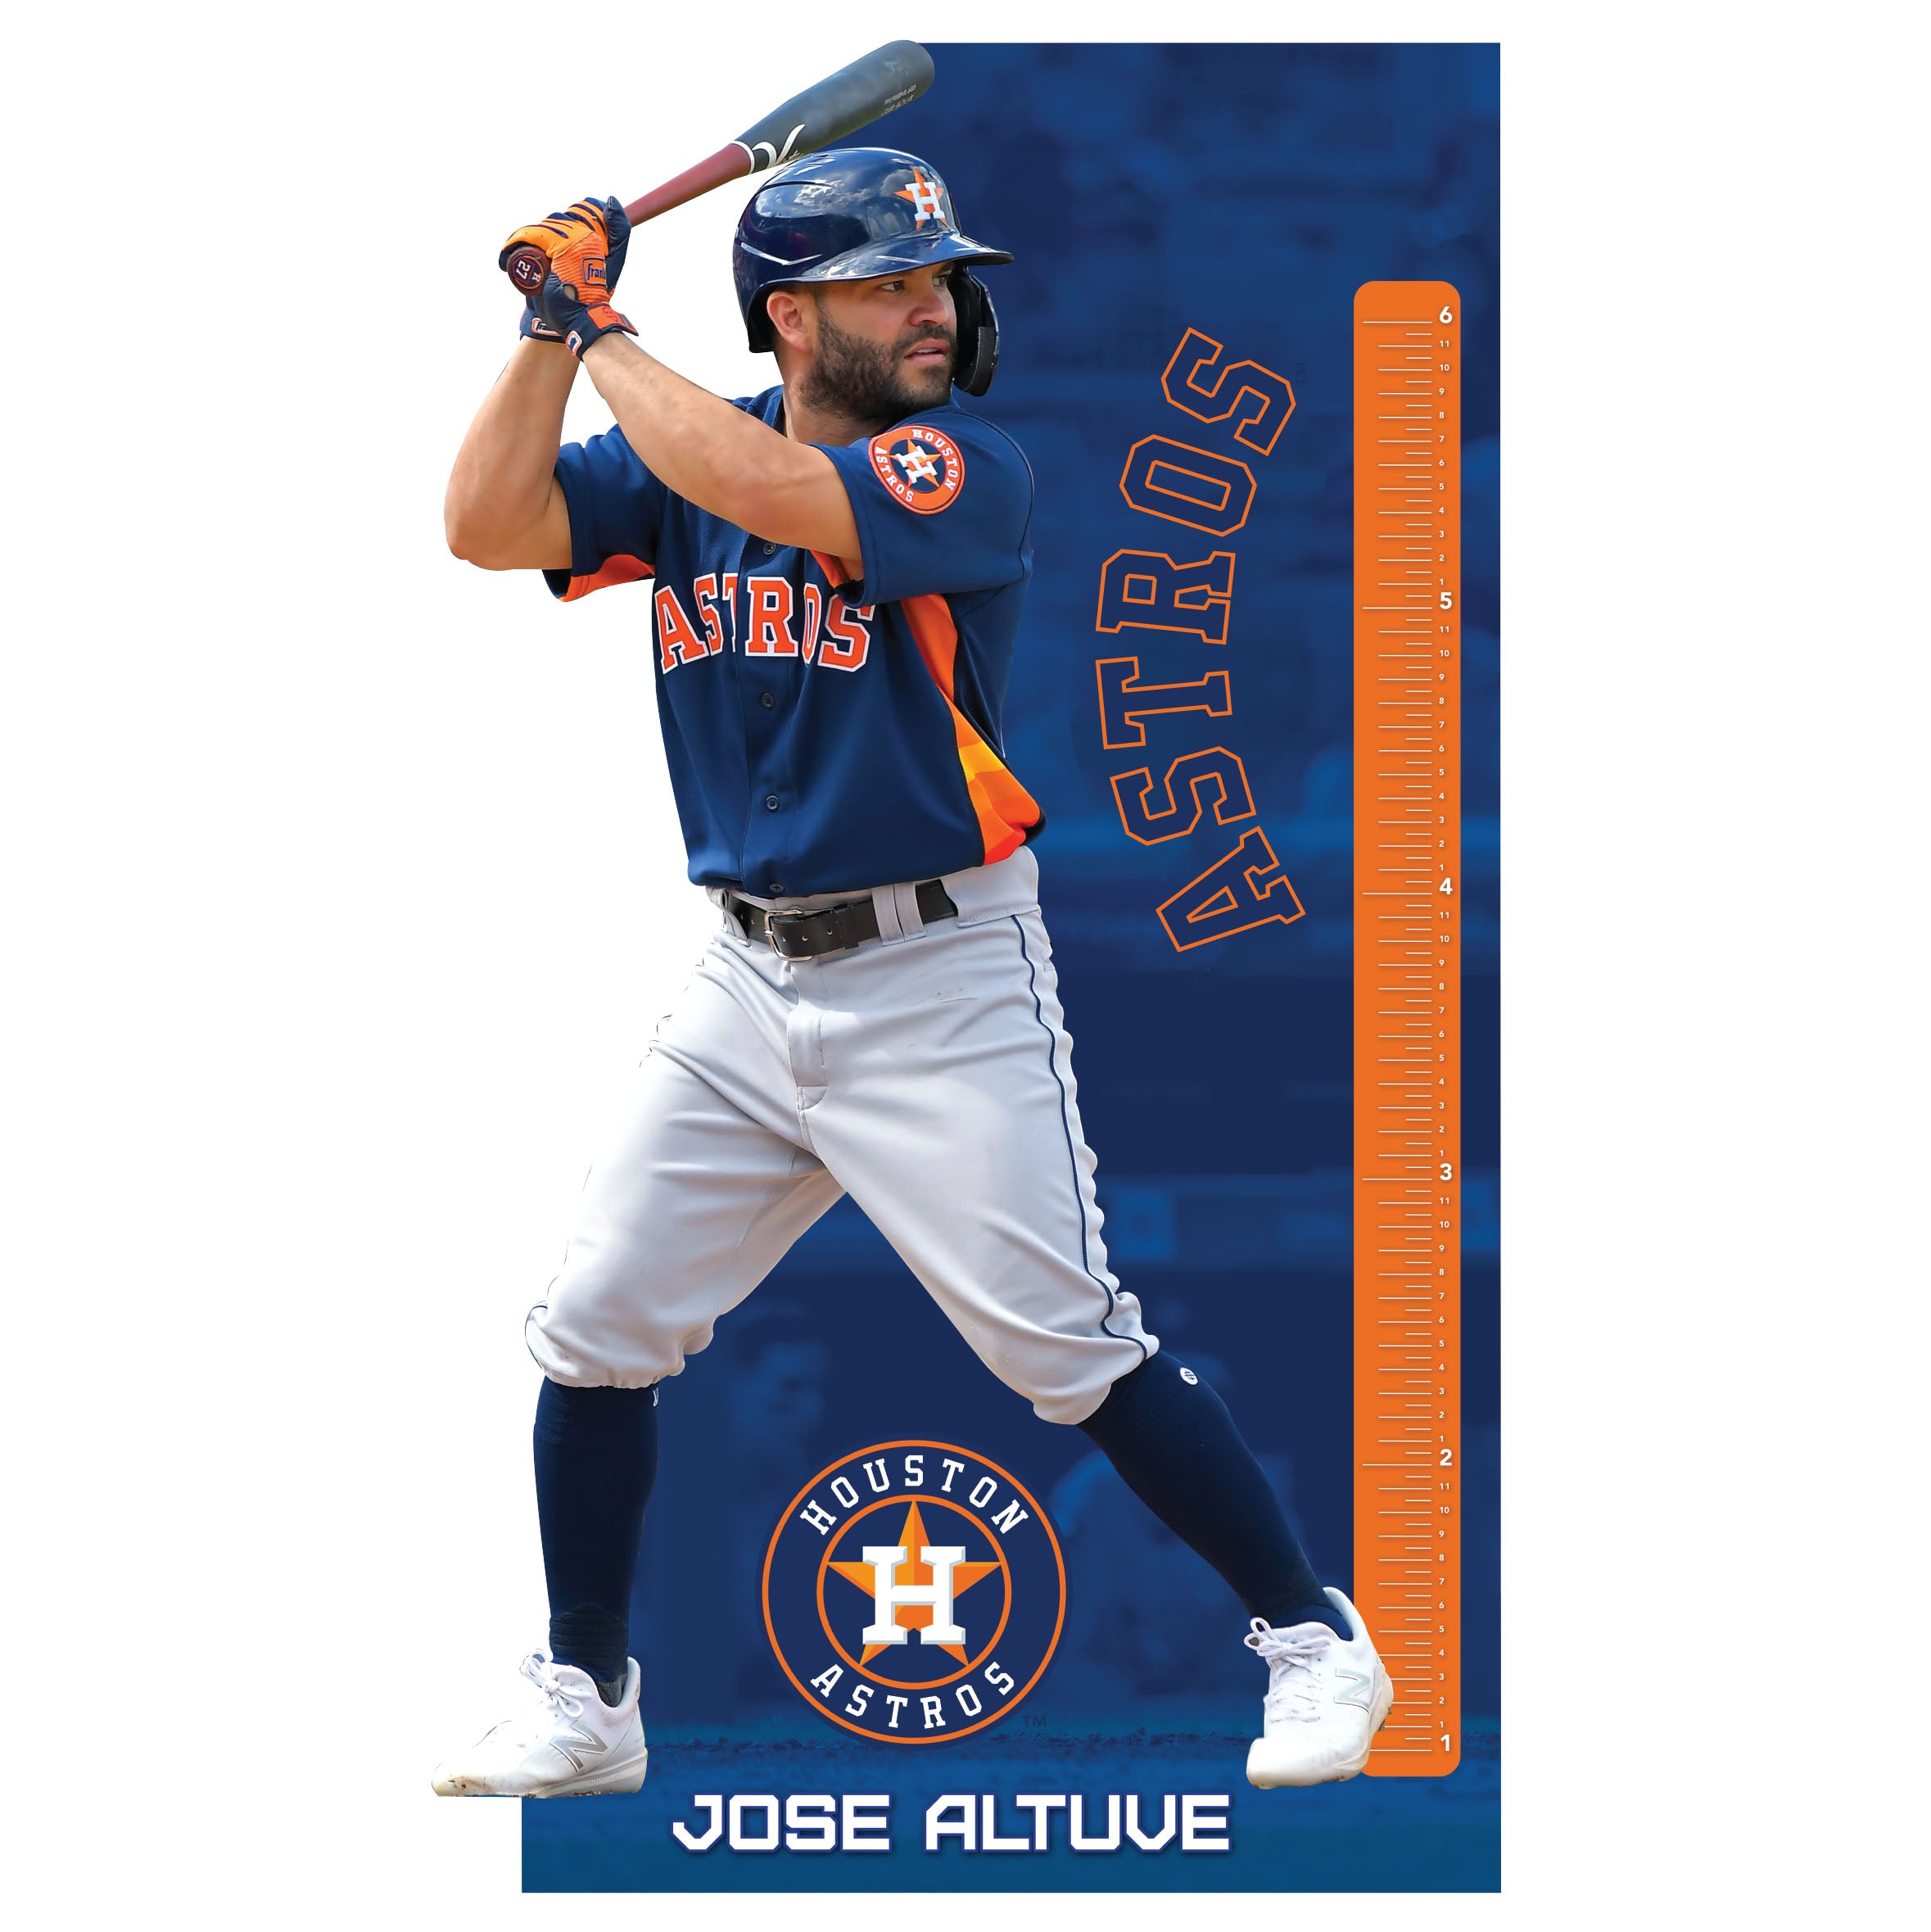 Houston Astros: Jose Altuve 2021 Growth Chart - MLB Removable Wall Adhesive Wall Decal Life-Size 45W x 78H